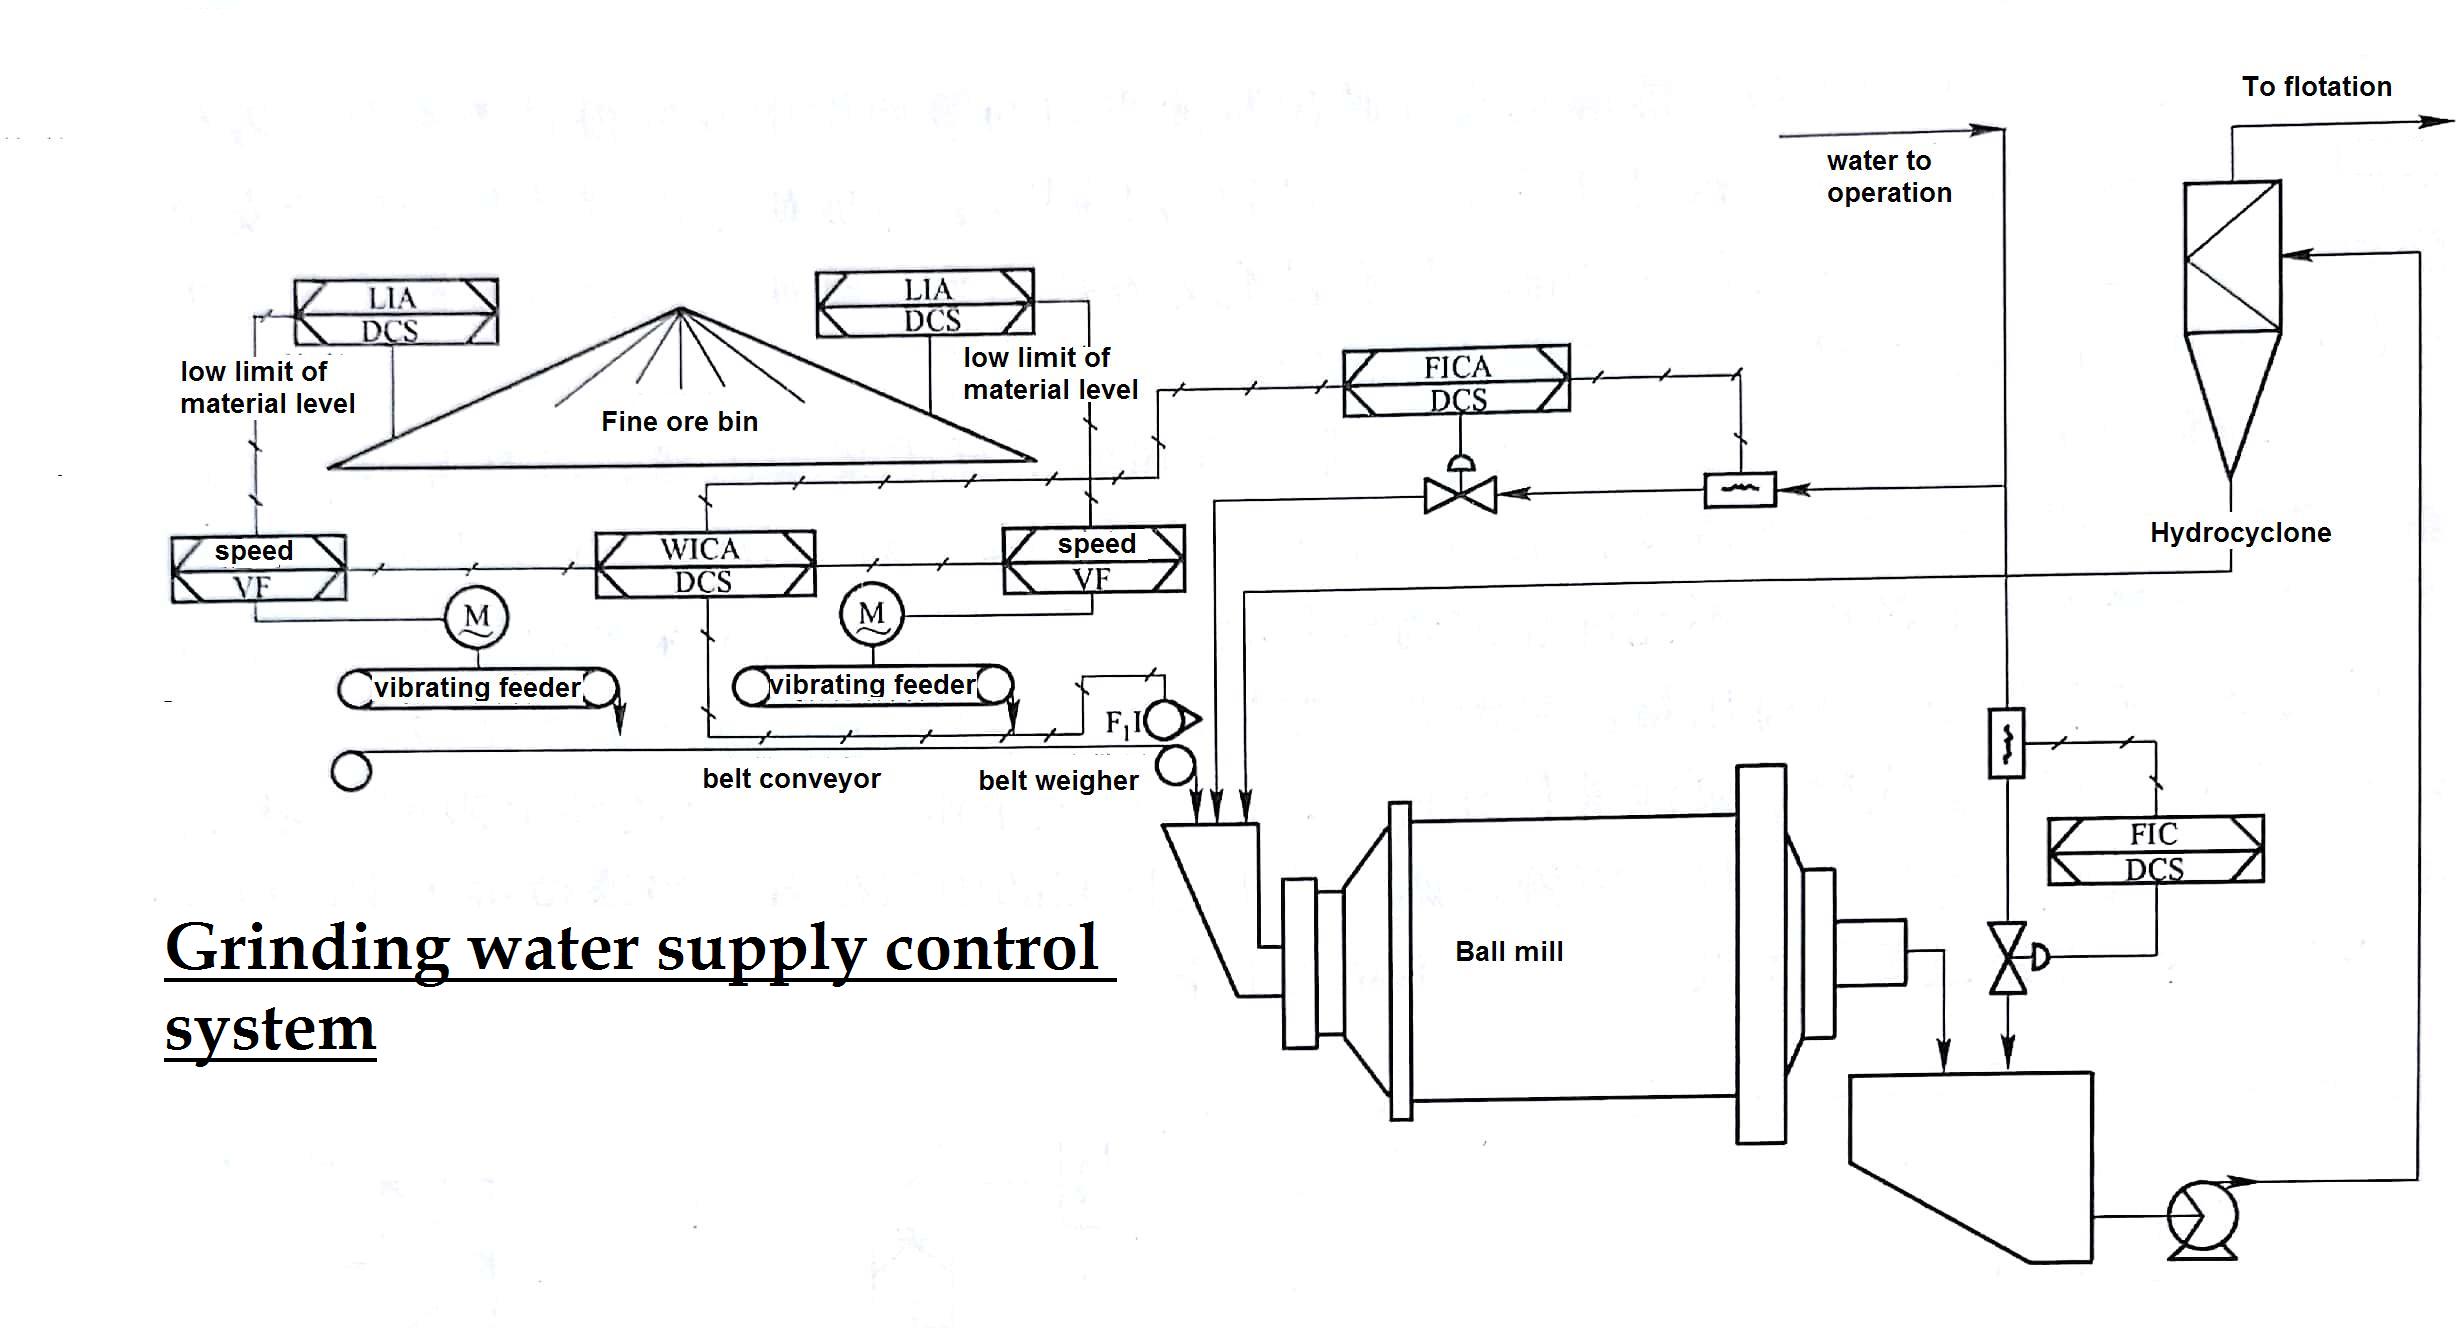 Grinding water supply control